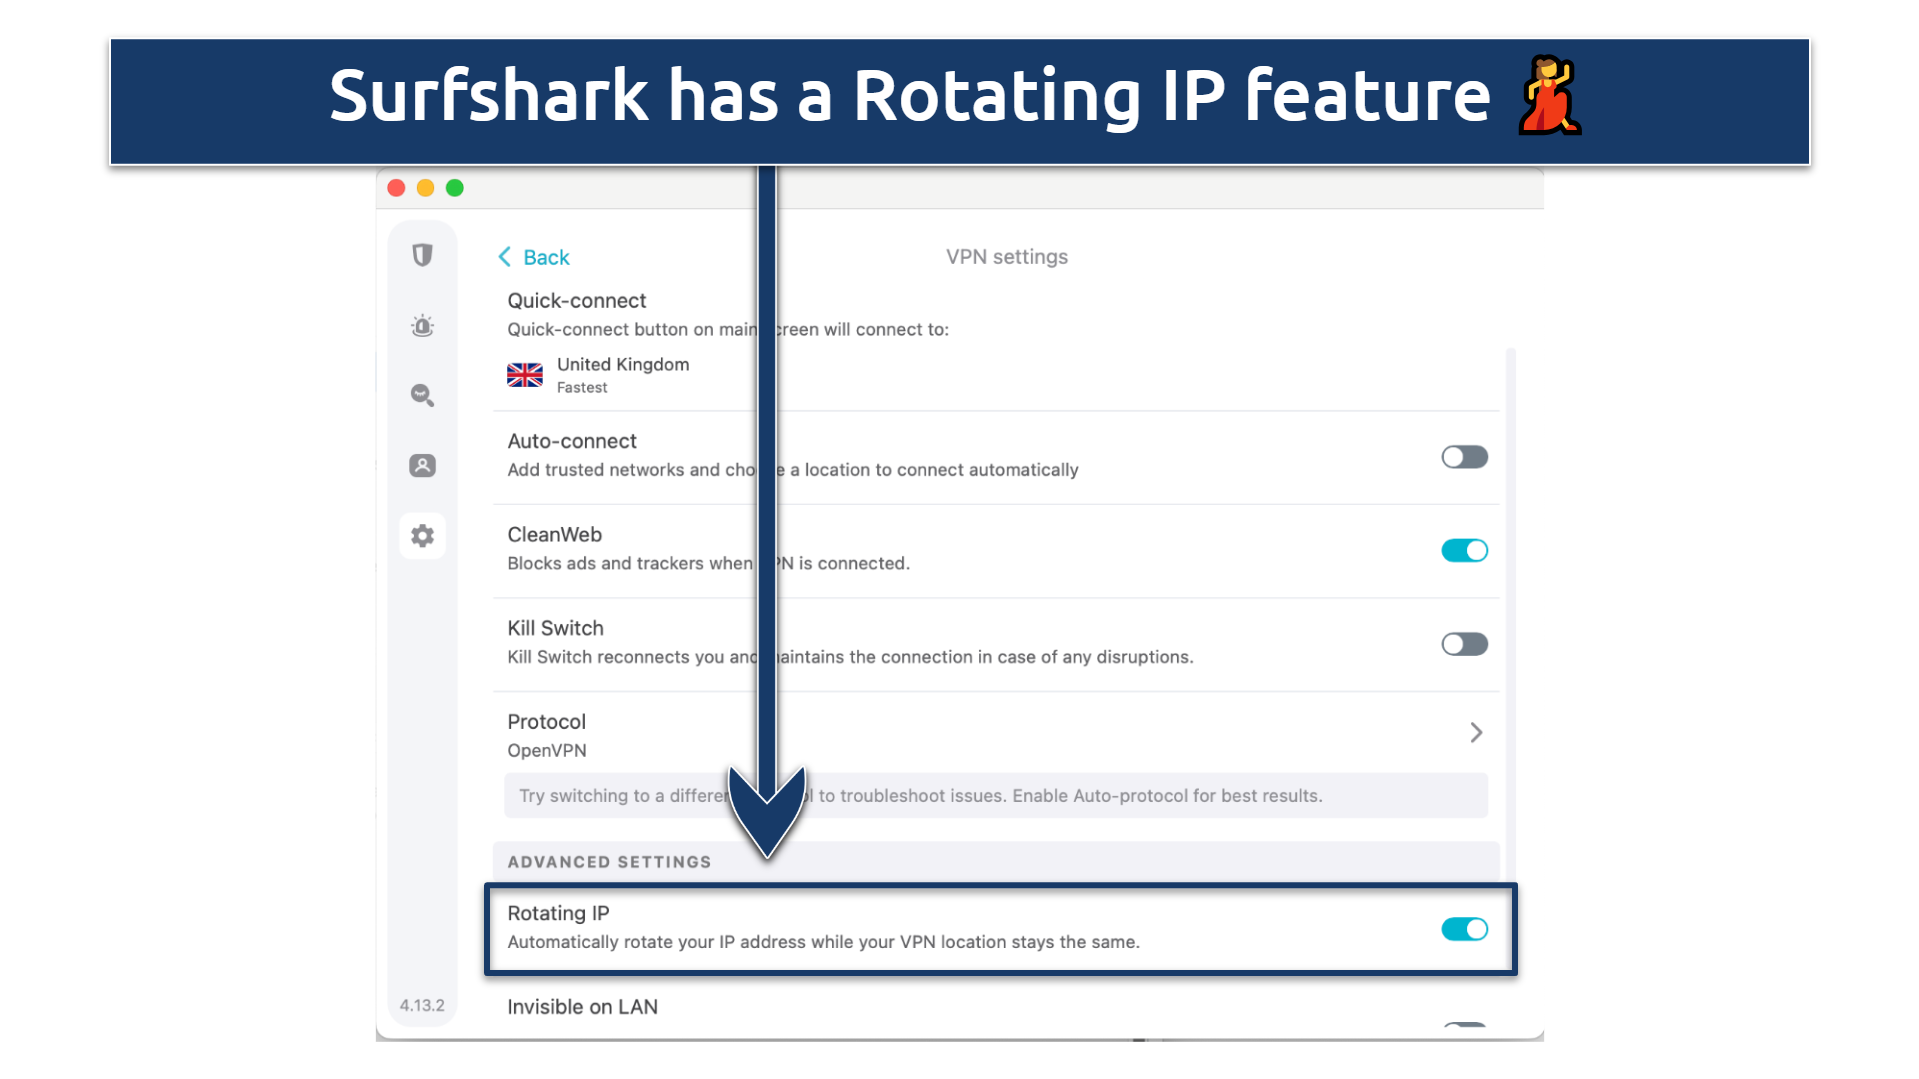 Screenshot of Surfshark's Settings menus with the Rotating IP feature highlighted